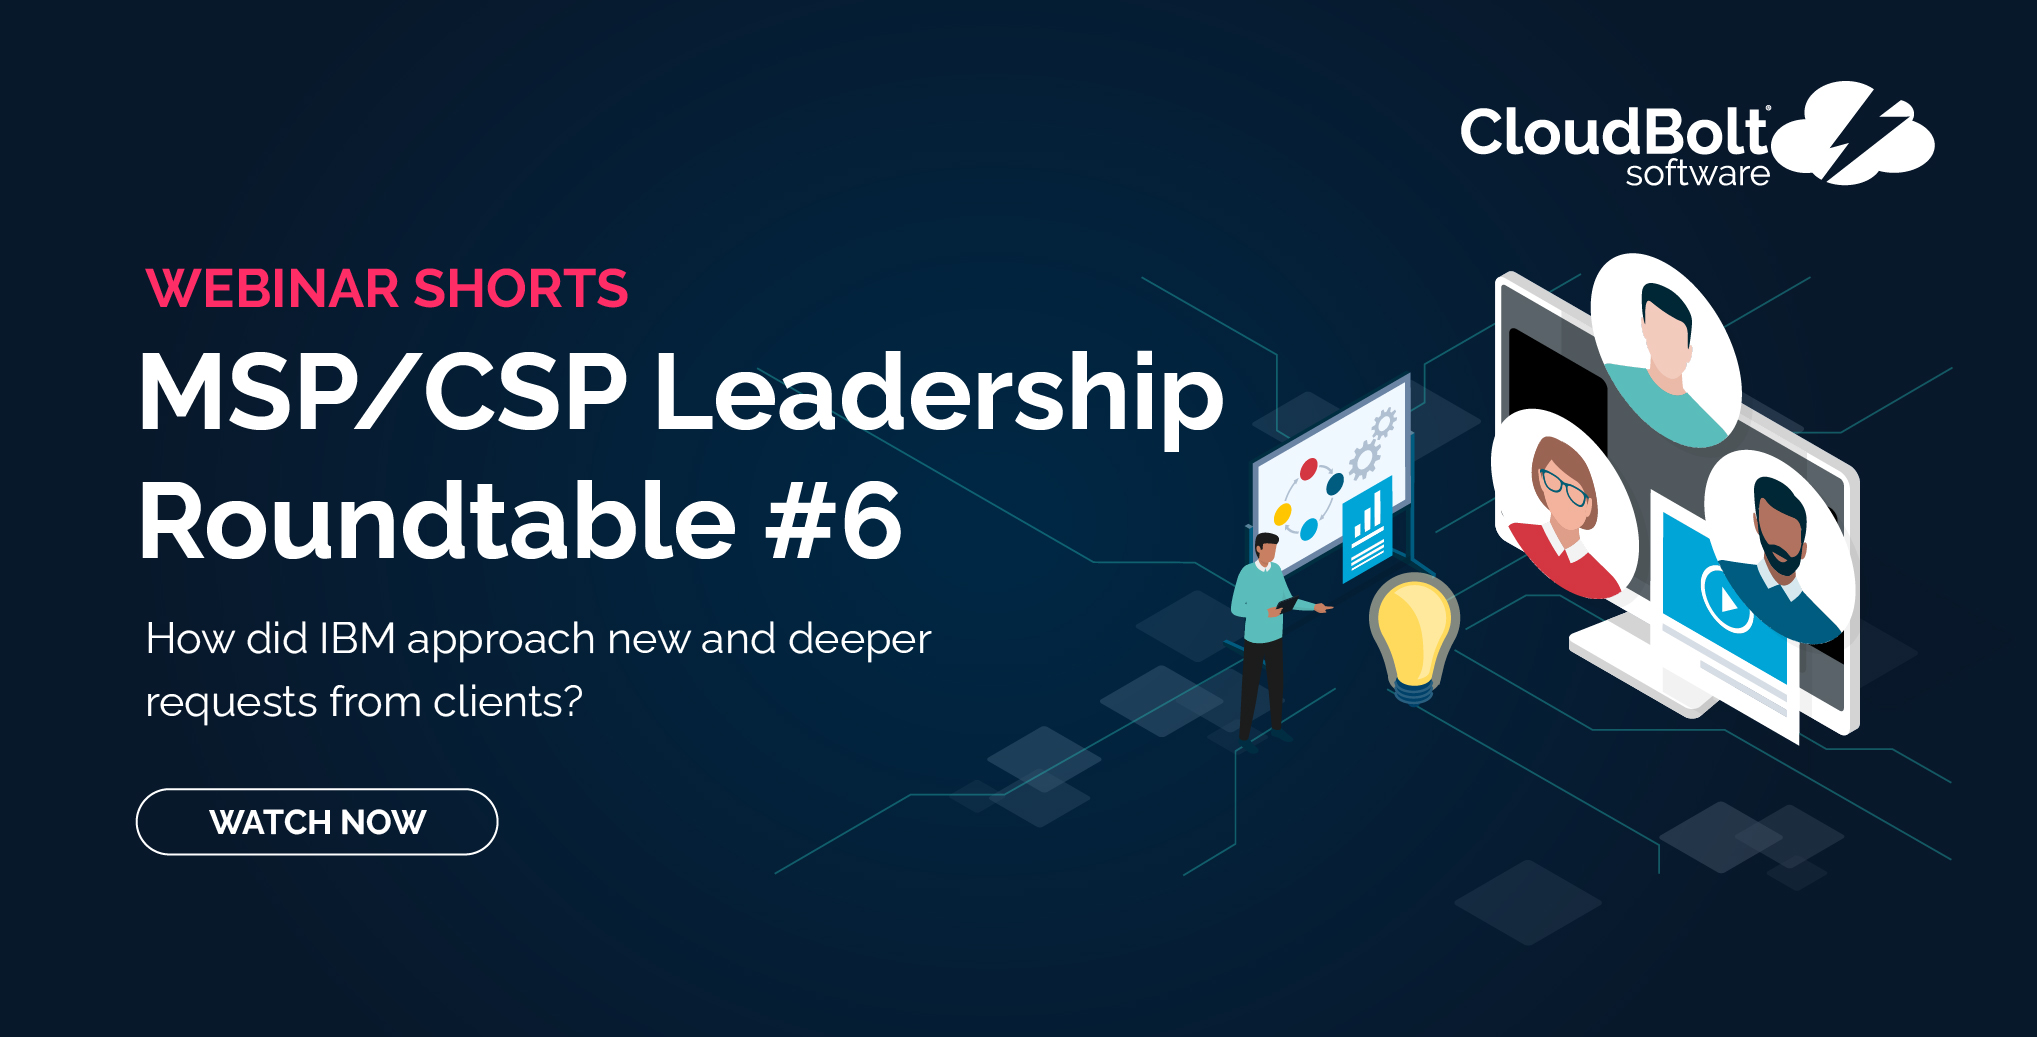 MSP Leadership Roundtable #6: How did IBM approach requests from clients?